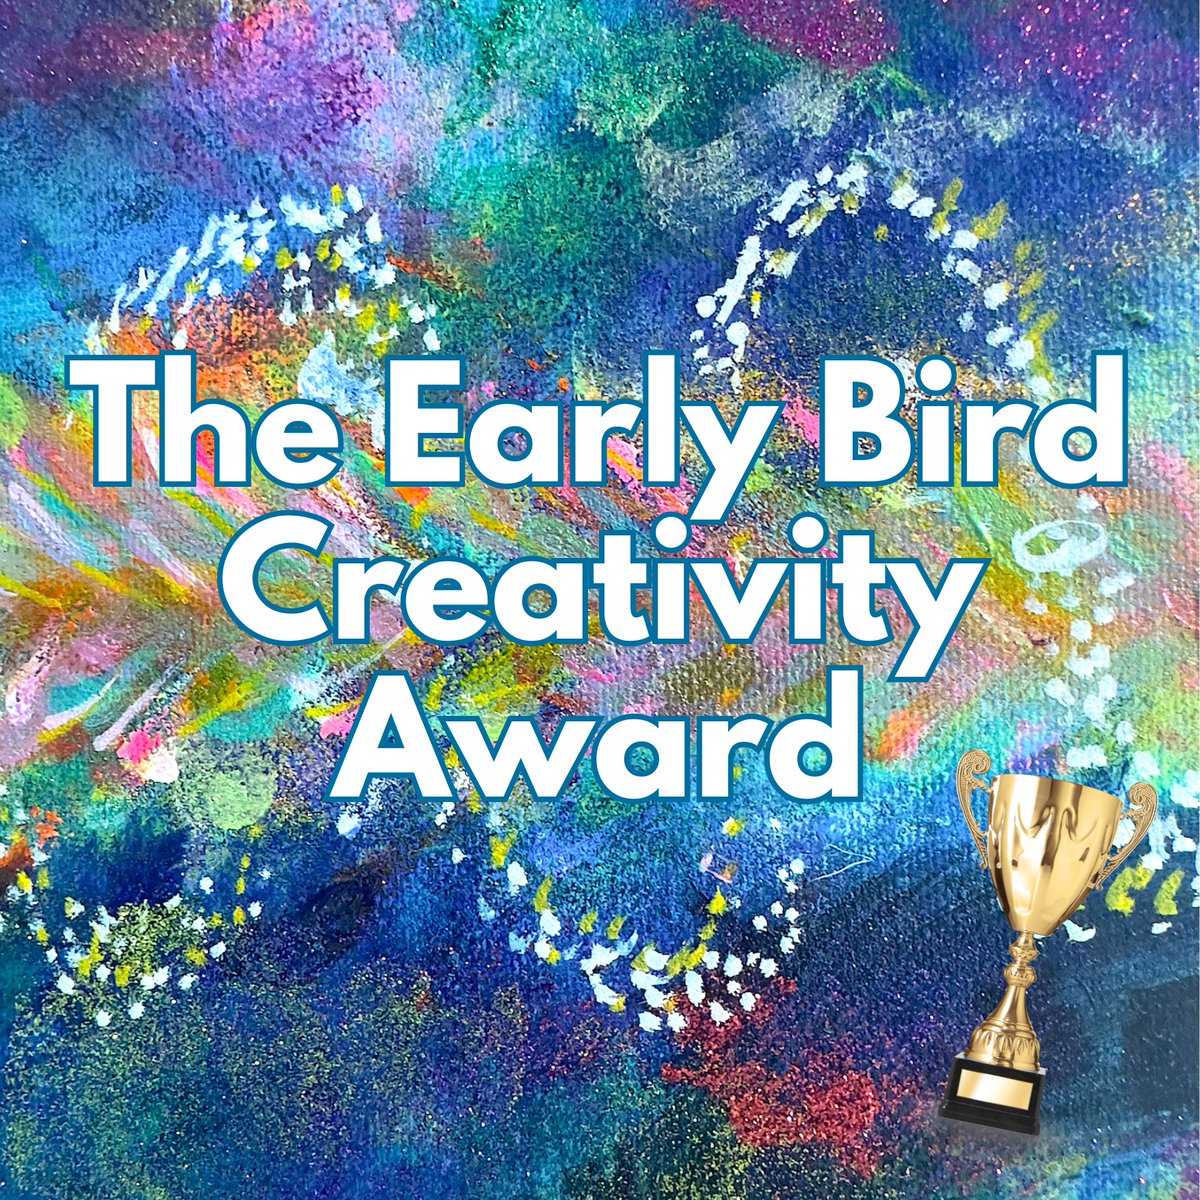 Submit your artwork by March 31st to compete for an exclusive Early Bird Grand Prize. #MIRAIArtExhibition #ColoringContest #GoodLucky #SupportingChildren